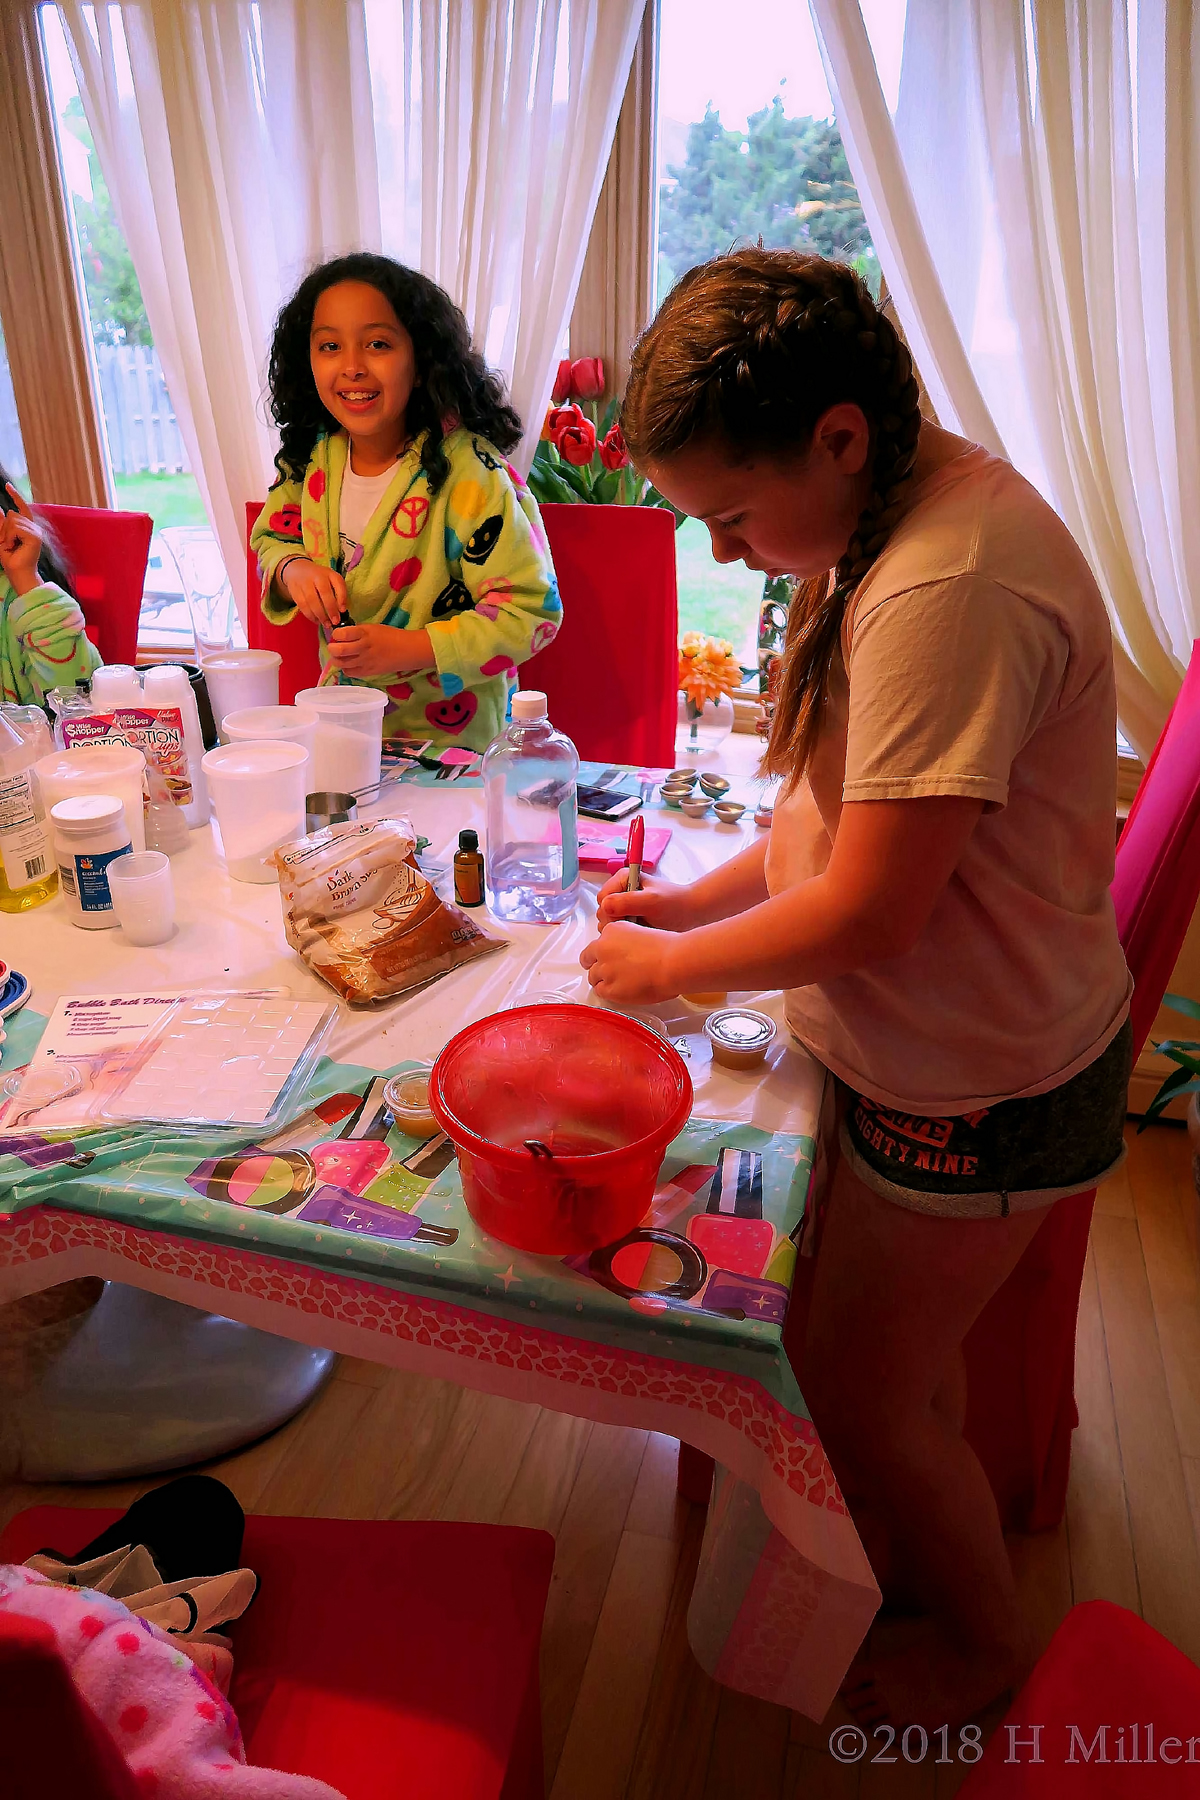 The Girls Having Fun With Kids Crafts Activities. 